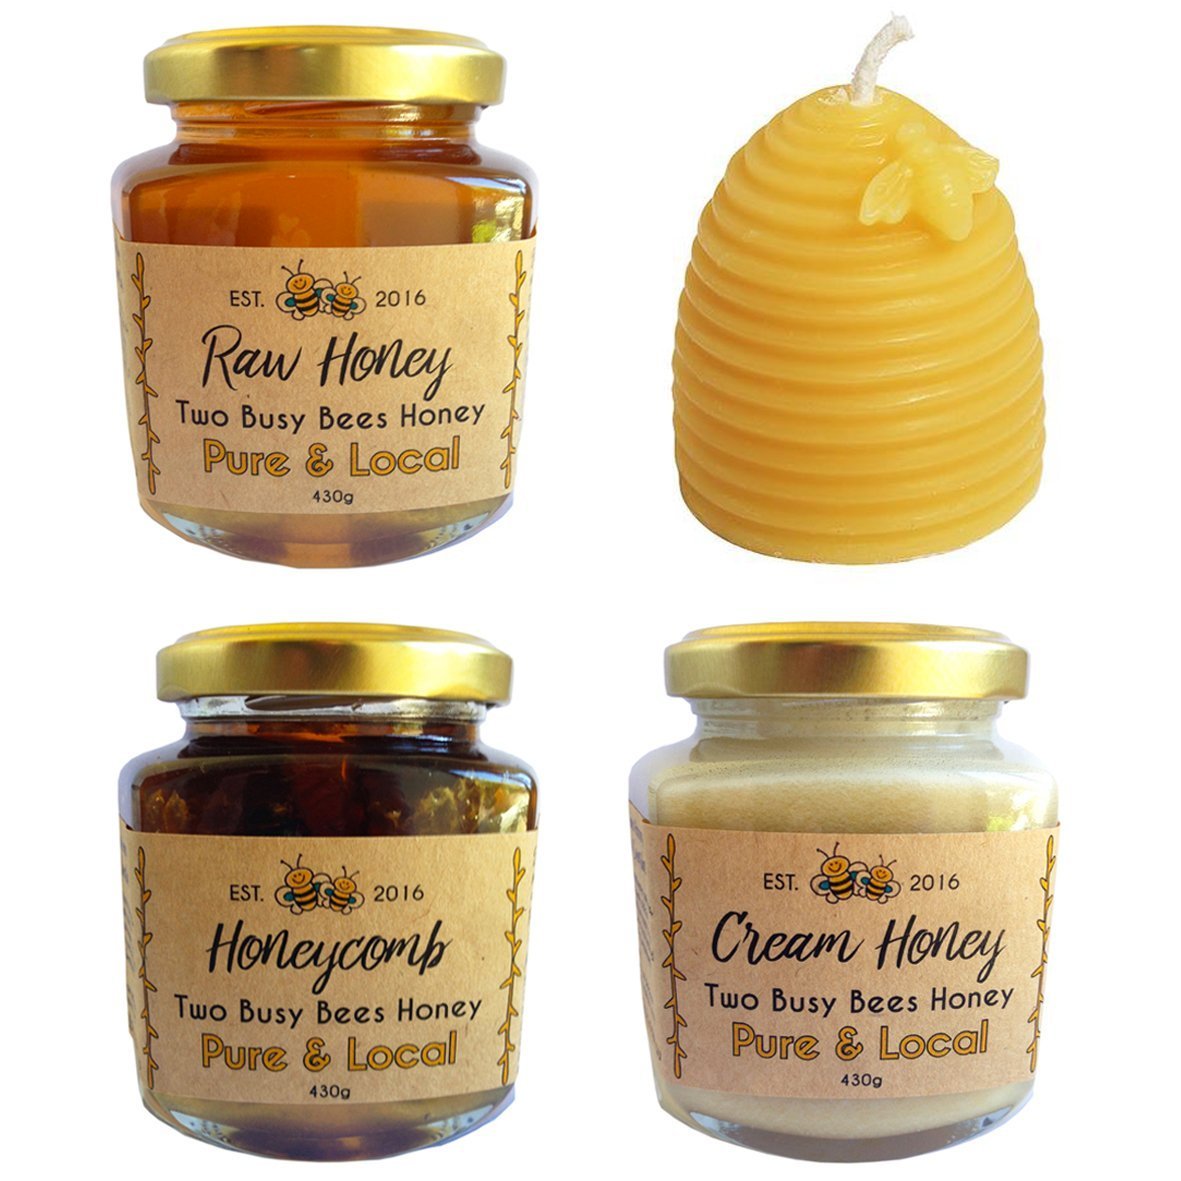 Two Busy Bees Honey | Raw Honey from Brisbane